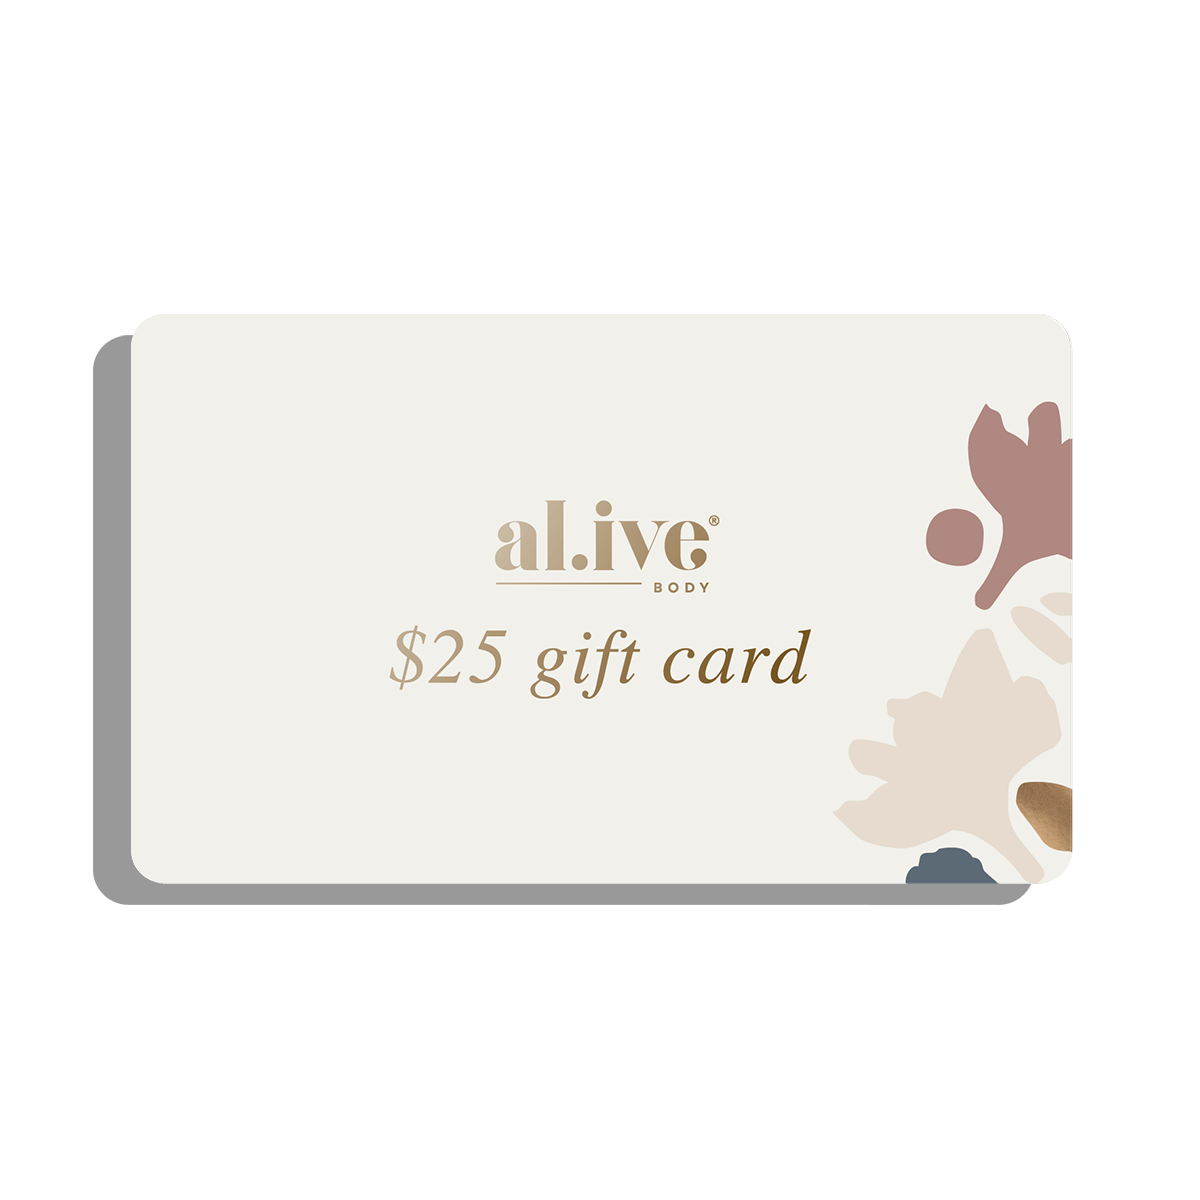 $25 HOLIDAY GIFT CARD - al.ive body